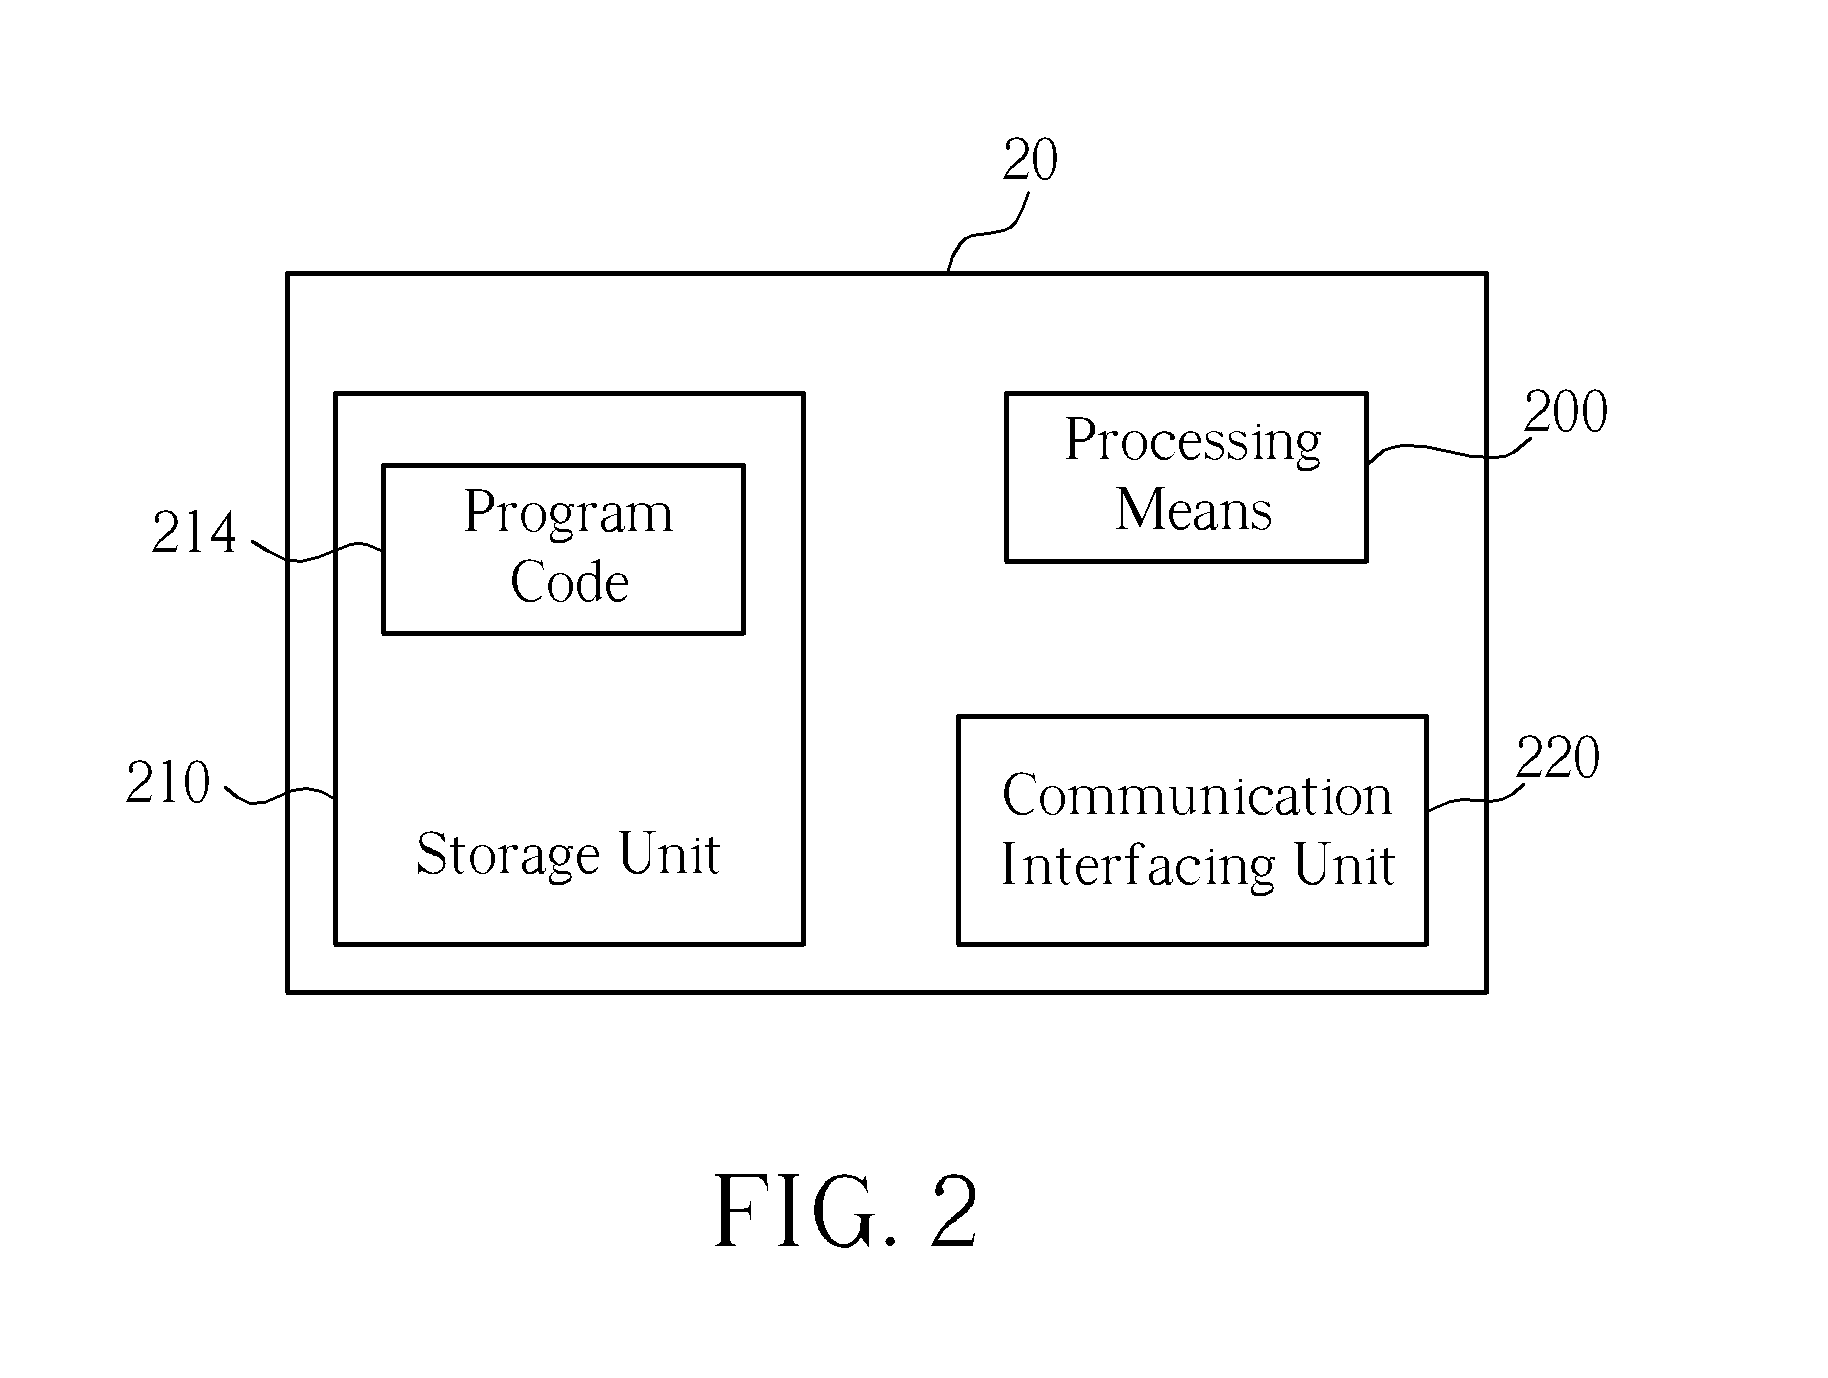 Method of SET-to-SET Location Service in a Communication System